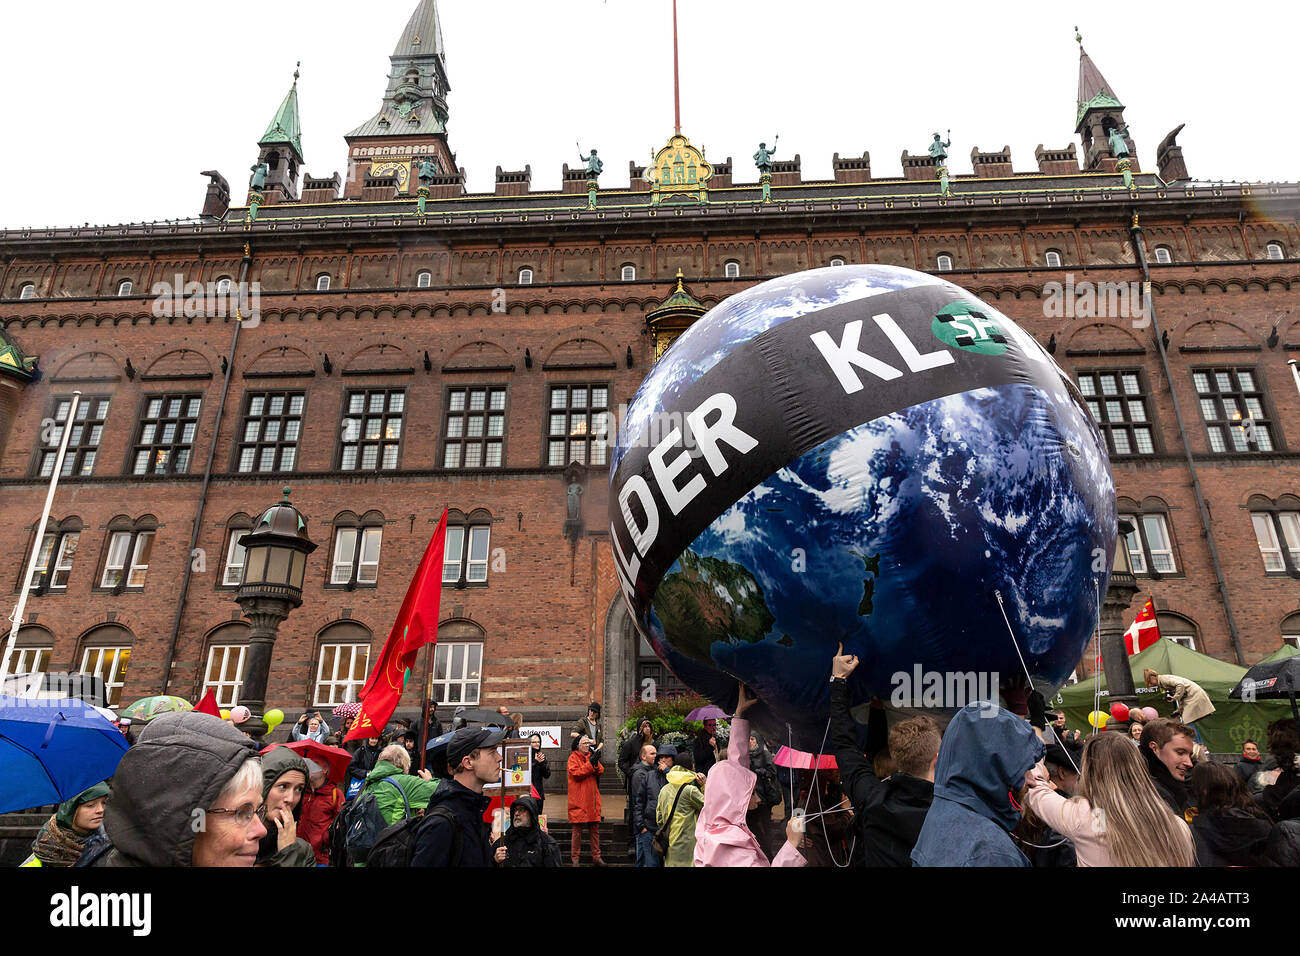 COPENHAGEN, DENMARK – OCTOBER 11, 2019:  Thousands of people gather at a People’s Climate March at Copenhagen City Hall Square and demanded swift and extensive climate action, which marks the conclusion of the C40 World Mayors Summit during this week in Copenhagen.  Alexandria Ocasio-Cortez, a US politician and climate activist, spoke at the demonstration. More than 90 mayors of some of the world’s largest and most influential cities representing some 700 million people met in Copenhagen from October 9-12 for the C40 World Mayors Summit. The purpose with the summit in Copenhagen was to build a Stock Photo